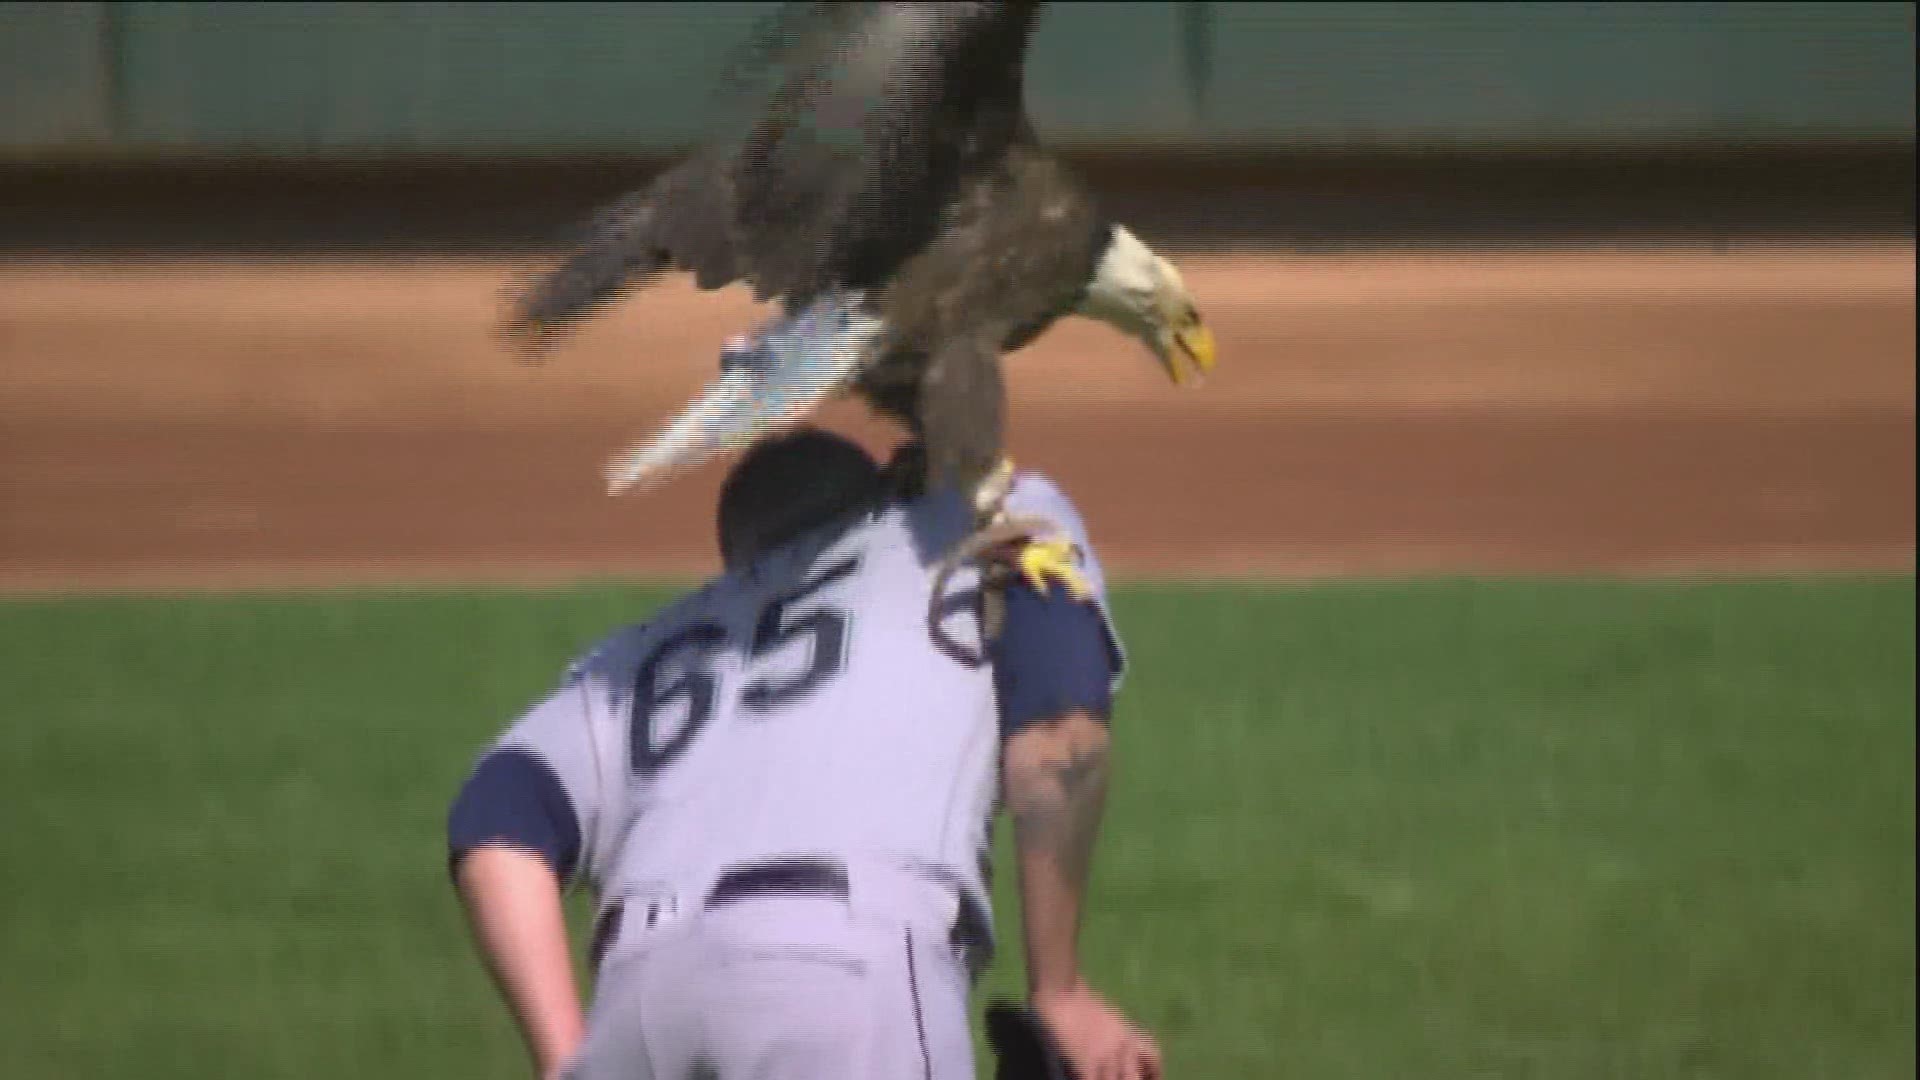 The eagle has landed ... on James Paxton's shoulder